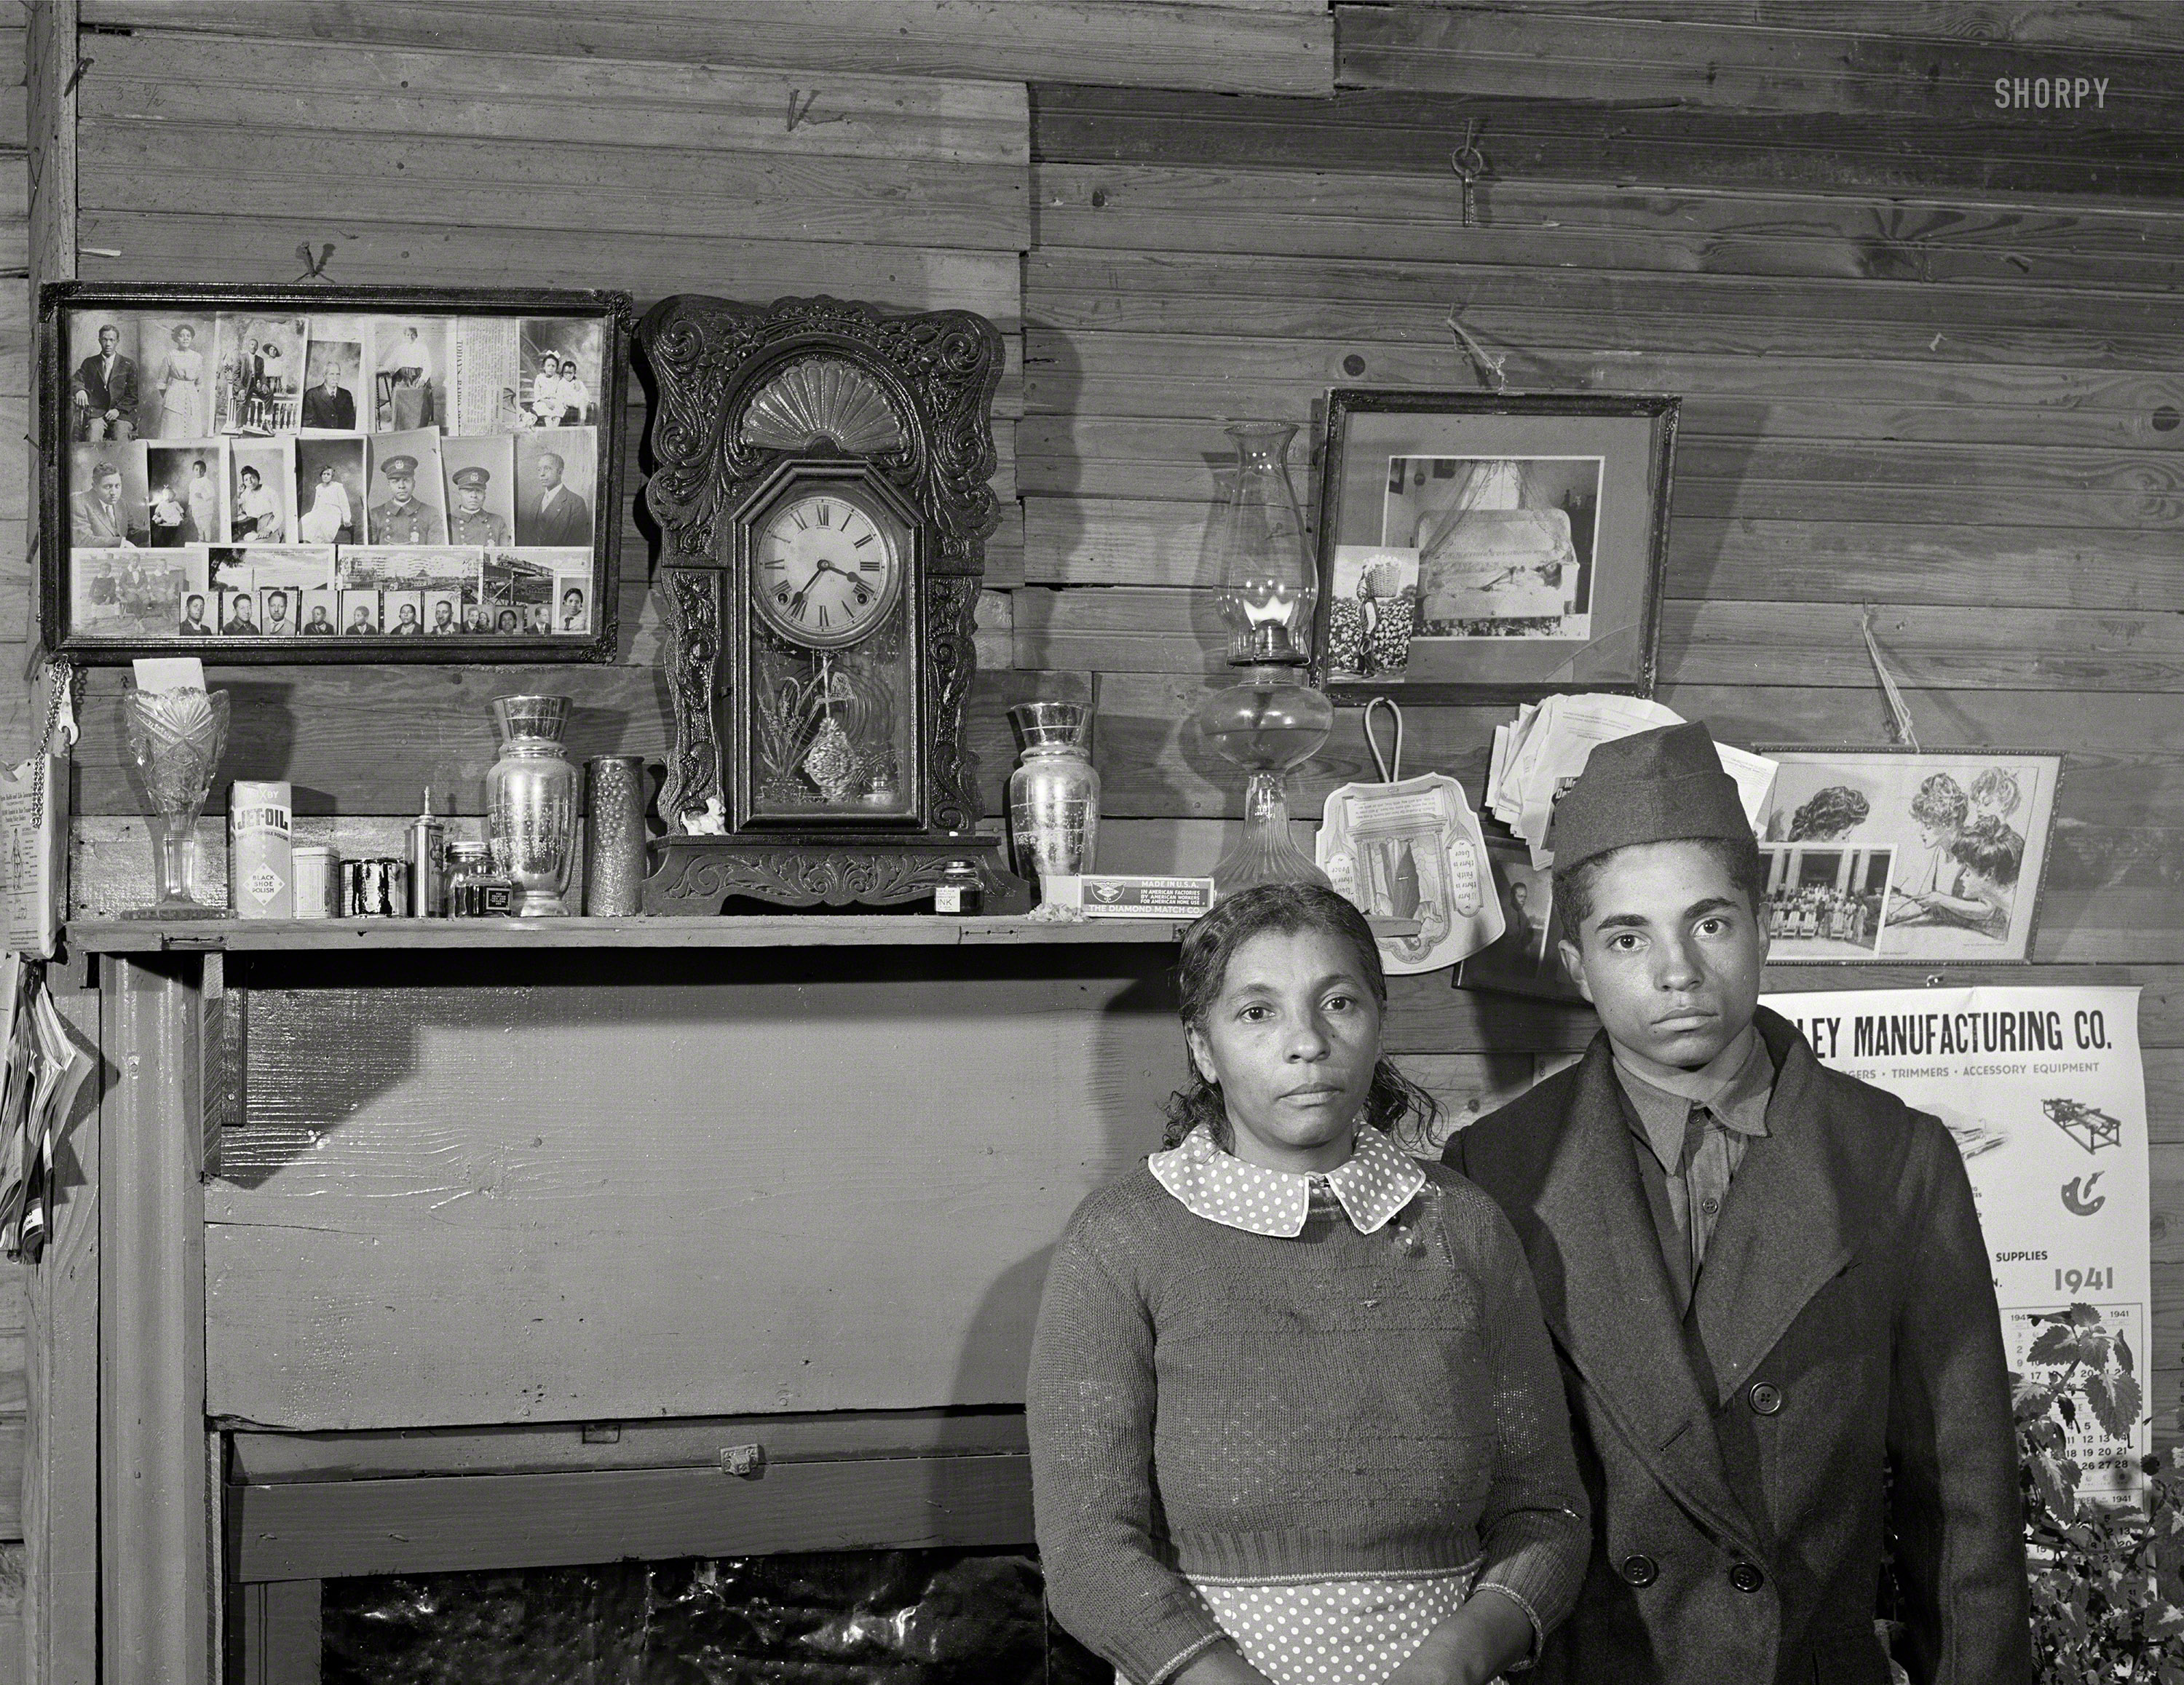 November 1941. "Mrs. Edgar Jones and her son, Farm Security Administration clients near Woodville, Georgia. Her son works at the Civilian Conservation Corps camp." Medium format negative by Jack Delano. View full size.